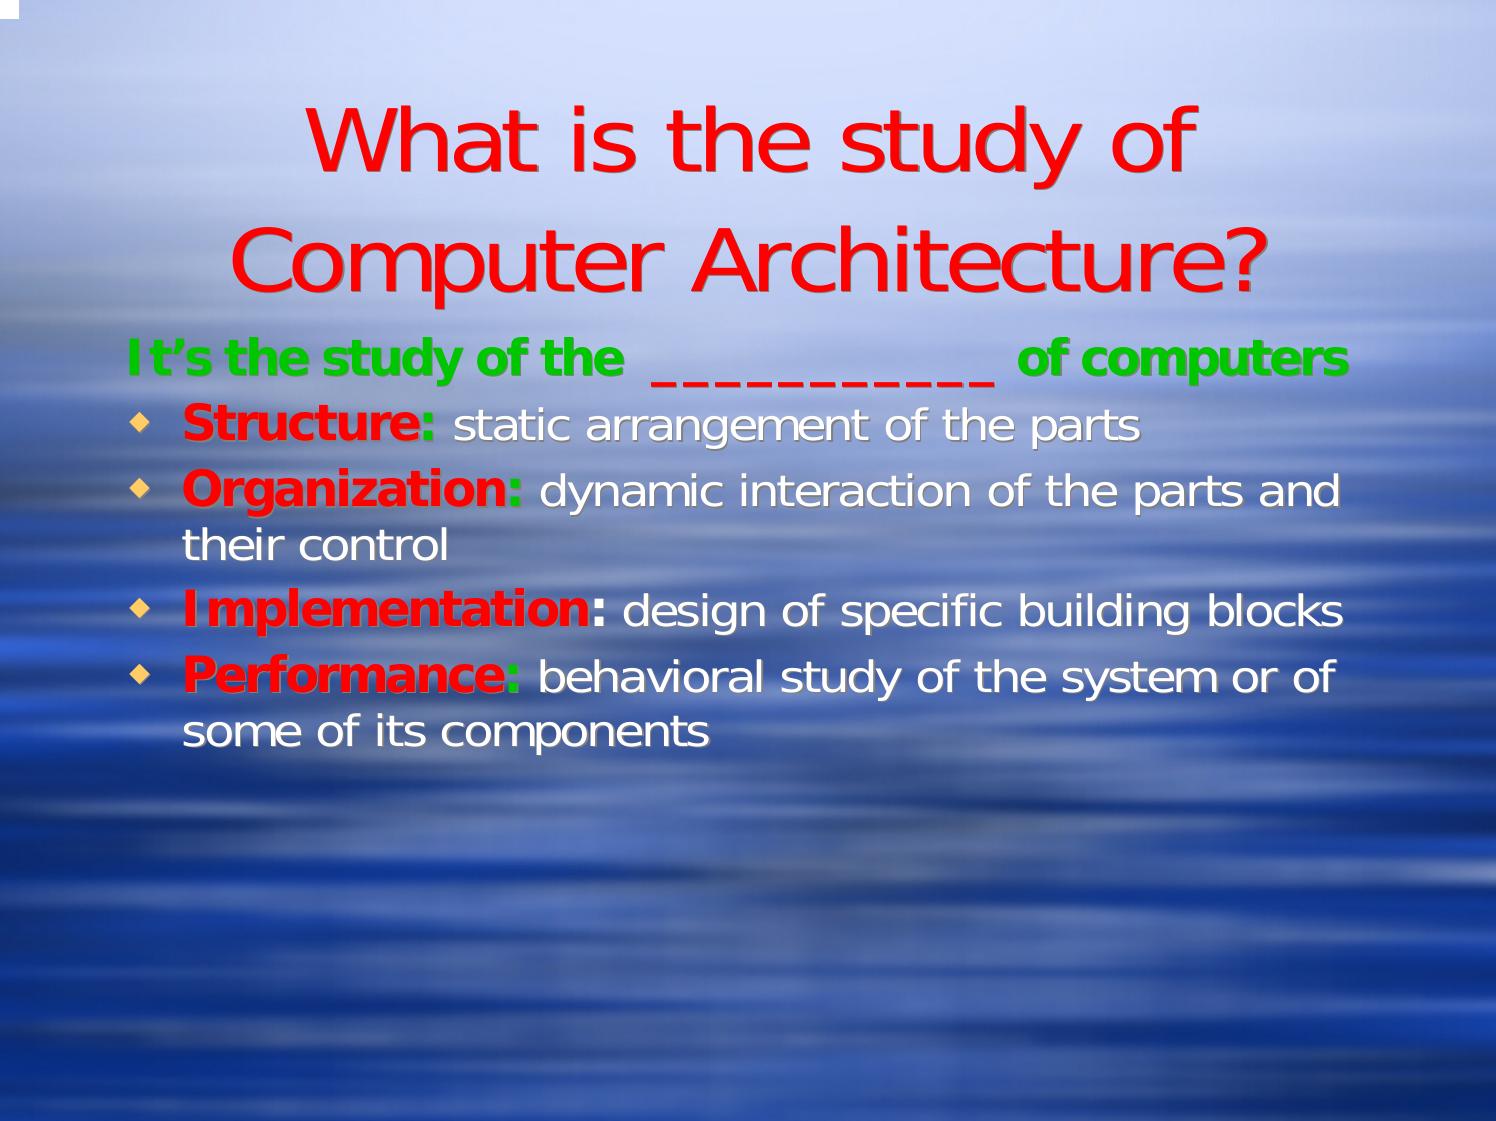 What is Computer Architecture?